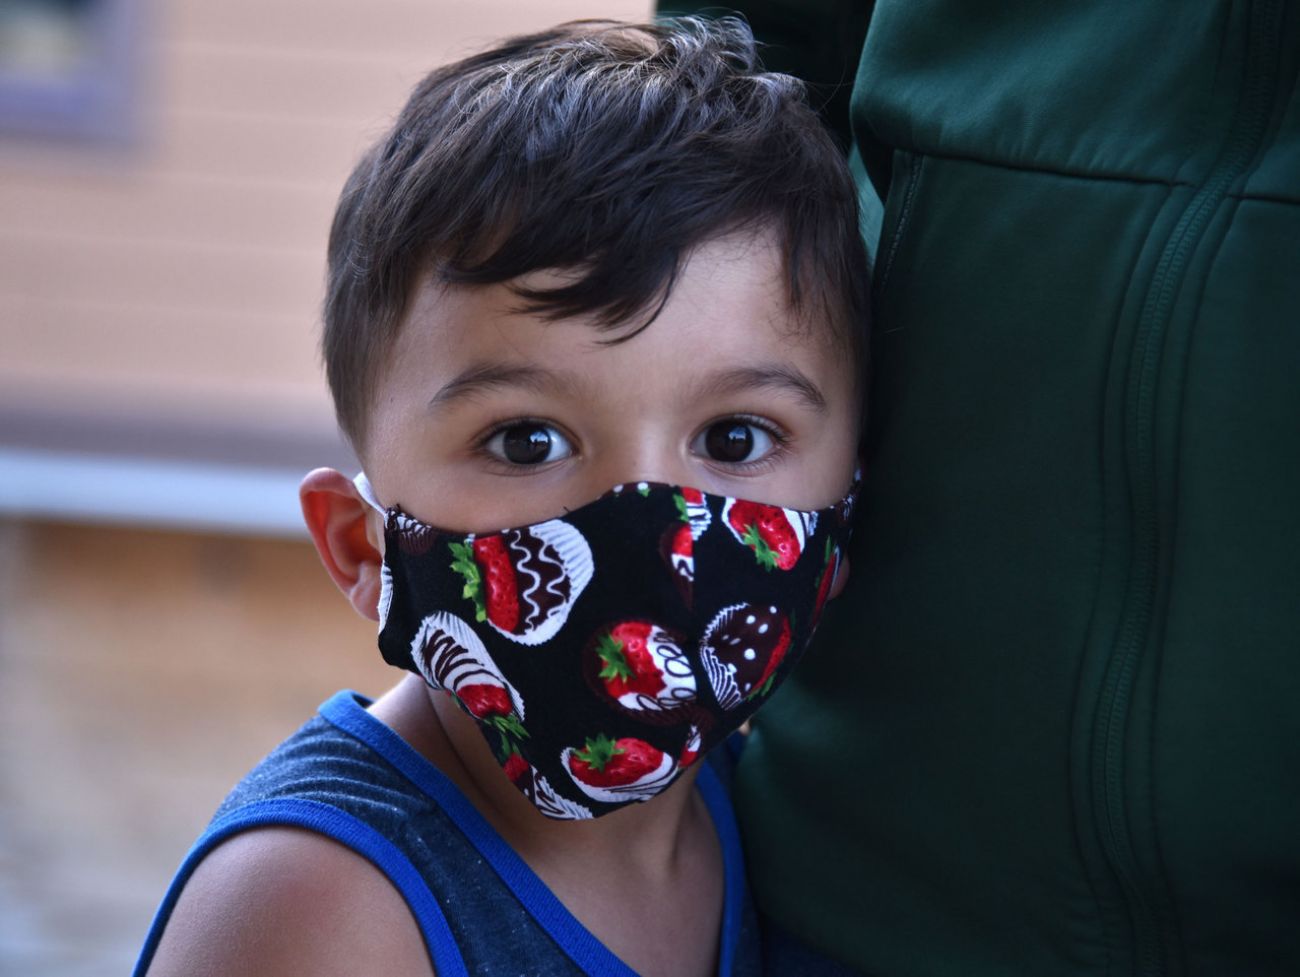 A boy, center, wearing a mask and looking directly into the camera while snuggled against his mother's hip